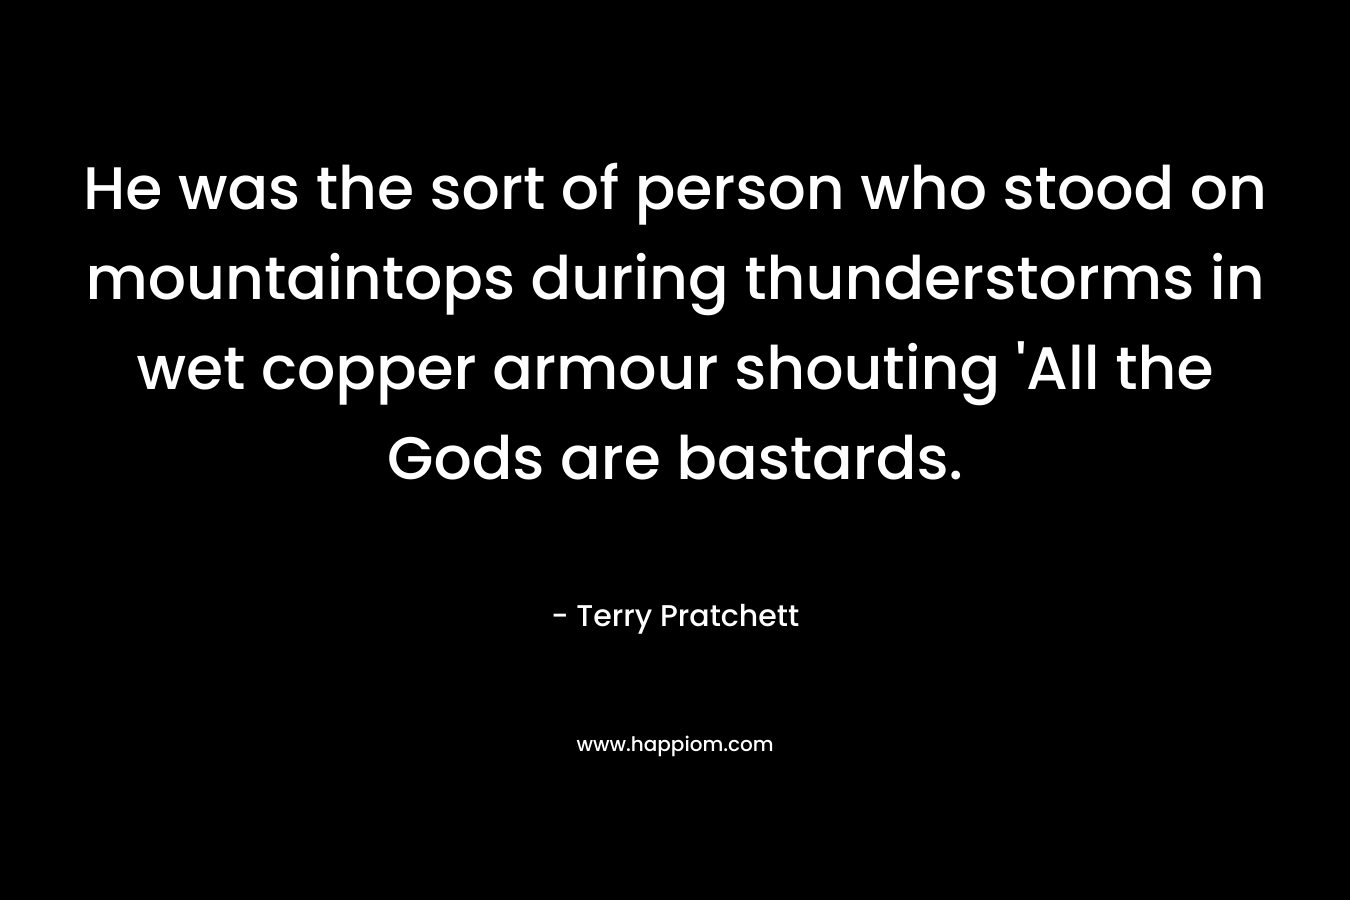 He was the sort of person who stood on mountaintops during thunderstorms in wet copper armour shouting ‘All the Gods are bastards. – Terry Pratchett